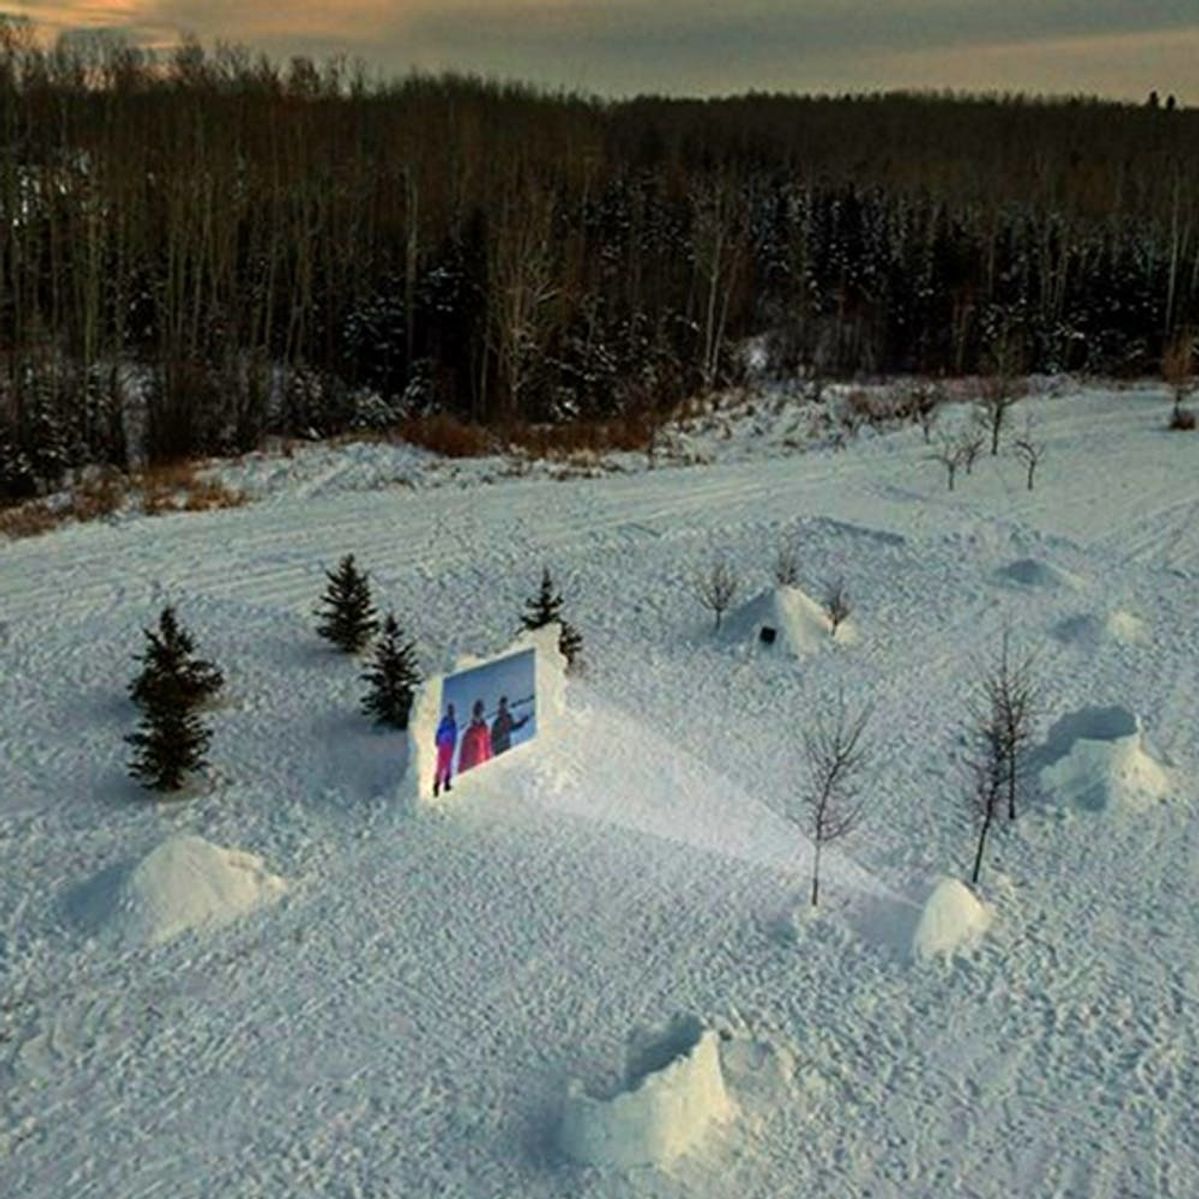 This Dude Made a Literal “Netflix And Chill” Theater from Snow